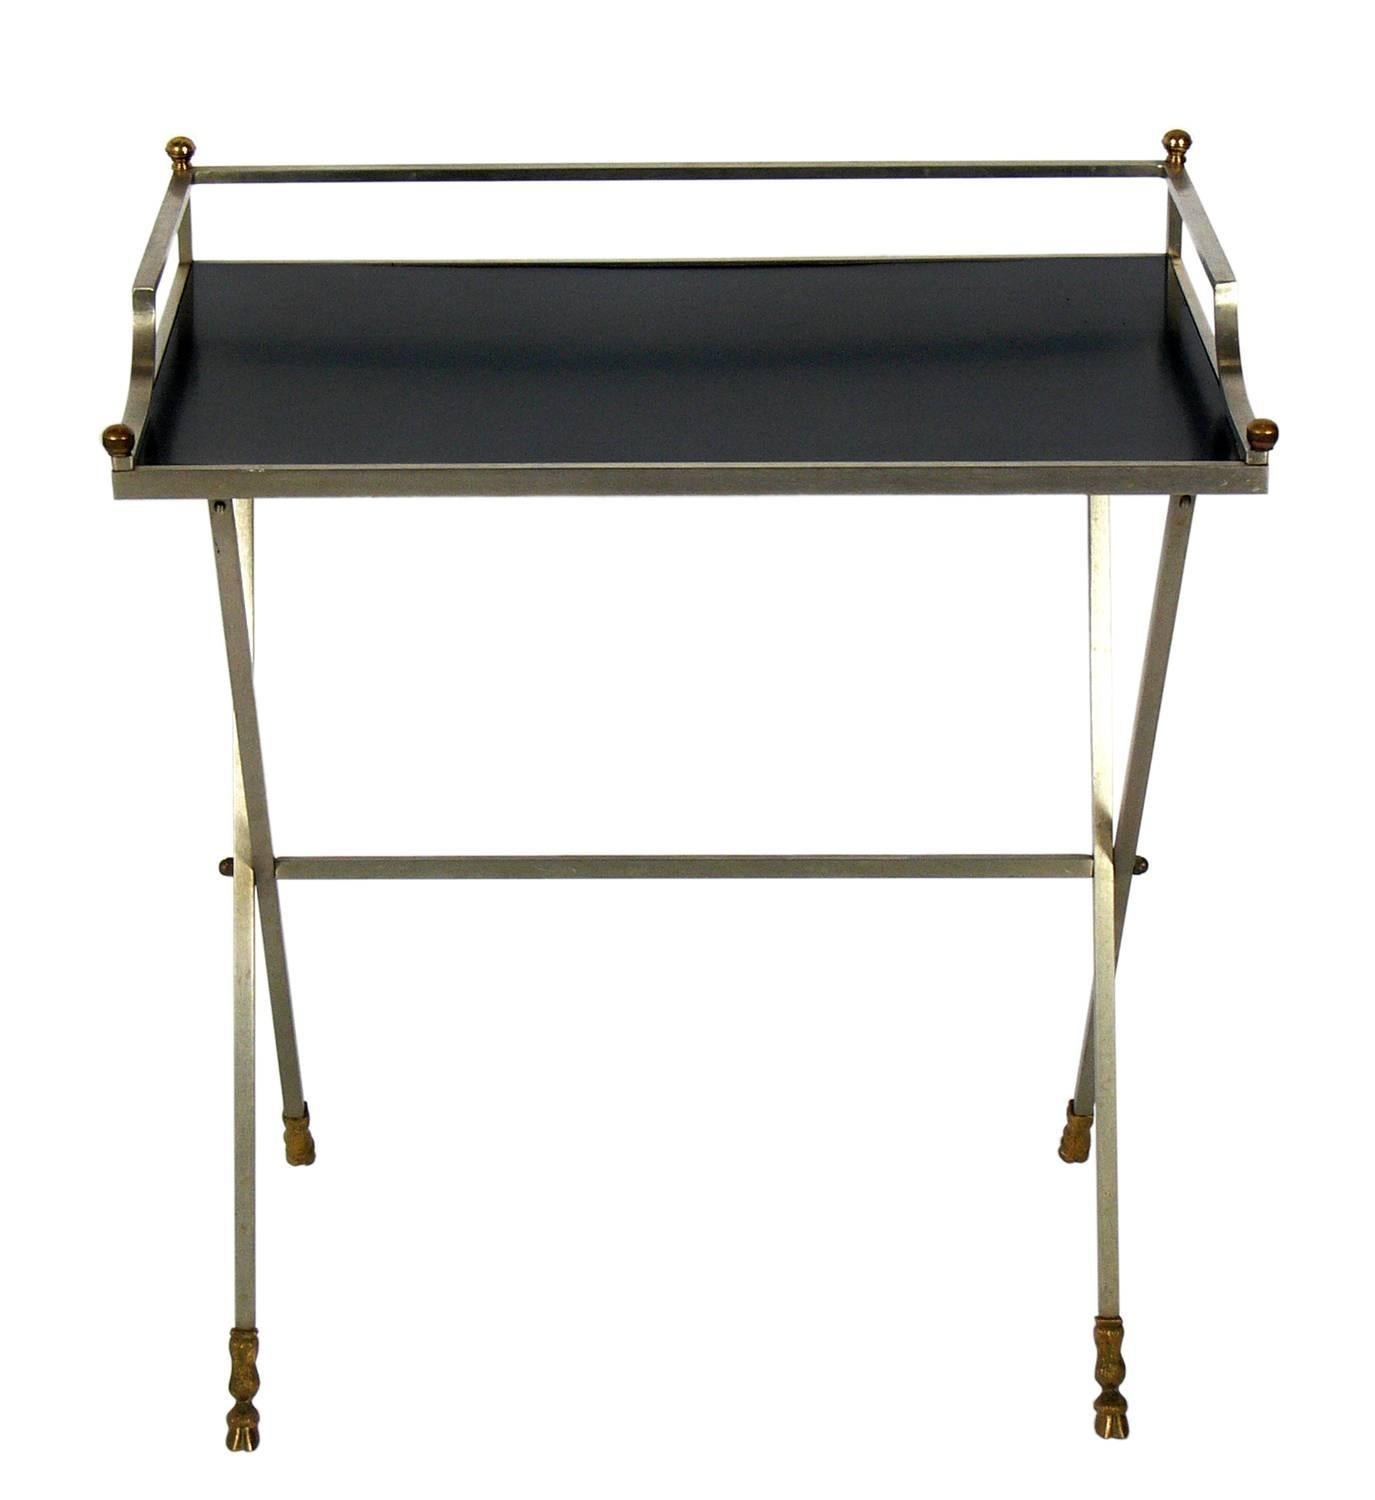 Elegant brushed steel and brass bar, in the manner of Maison Jansen, probably French, circa 1950s. This piece is a versatile size and can be used as a bar, desk, vanity, or console table. Low maintenance black laminate or micarta top.